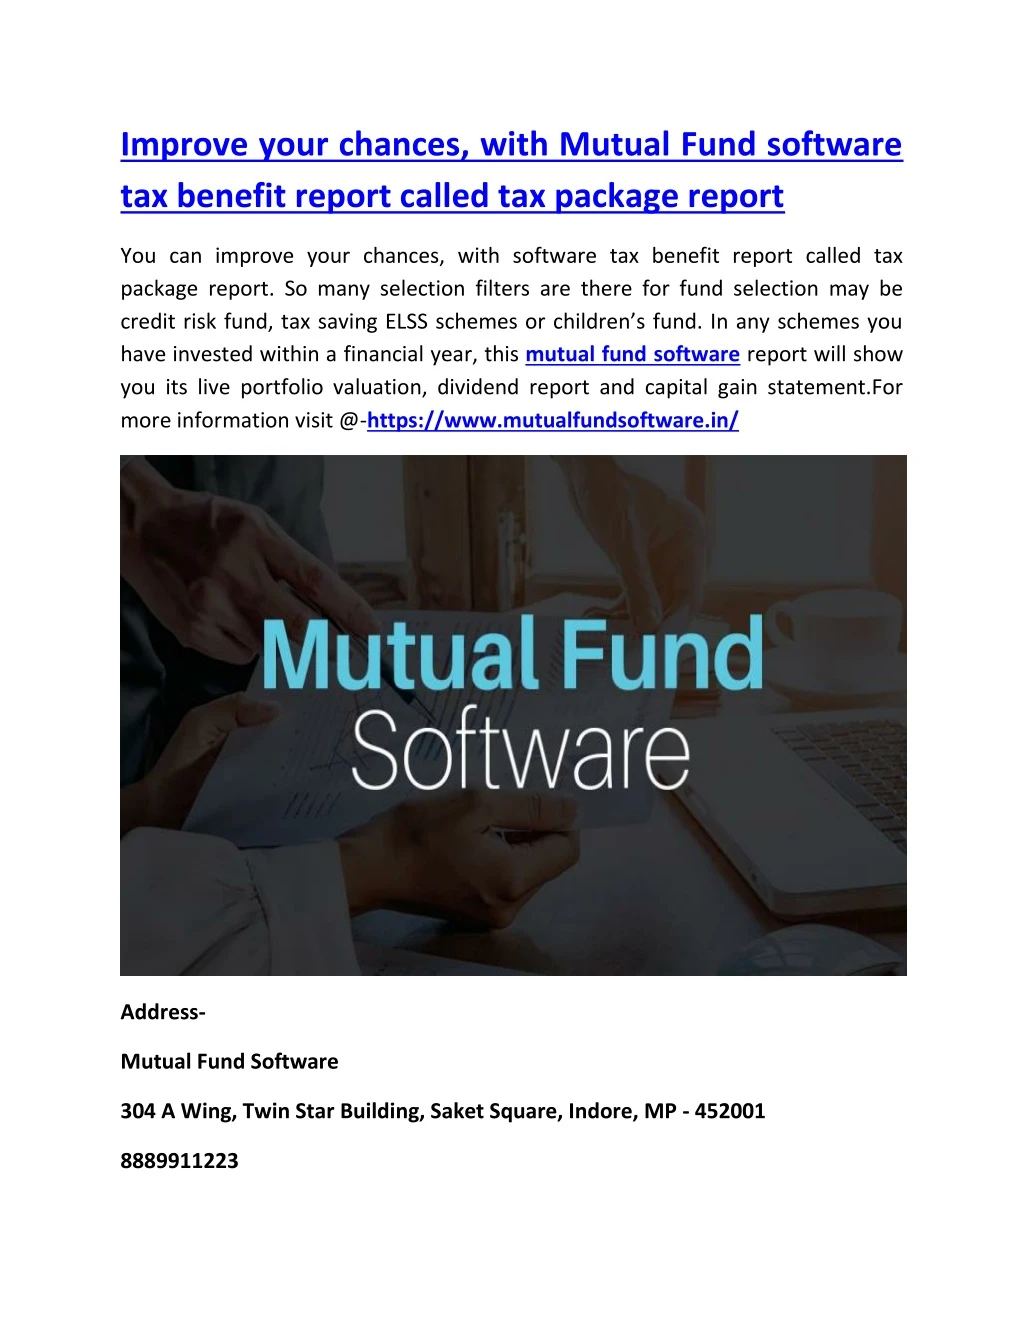 improve your chances with mutual fund software